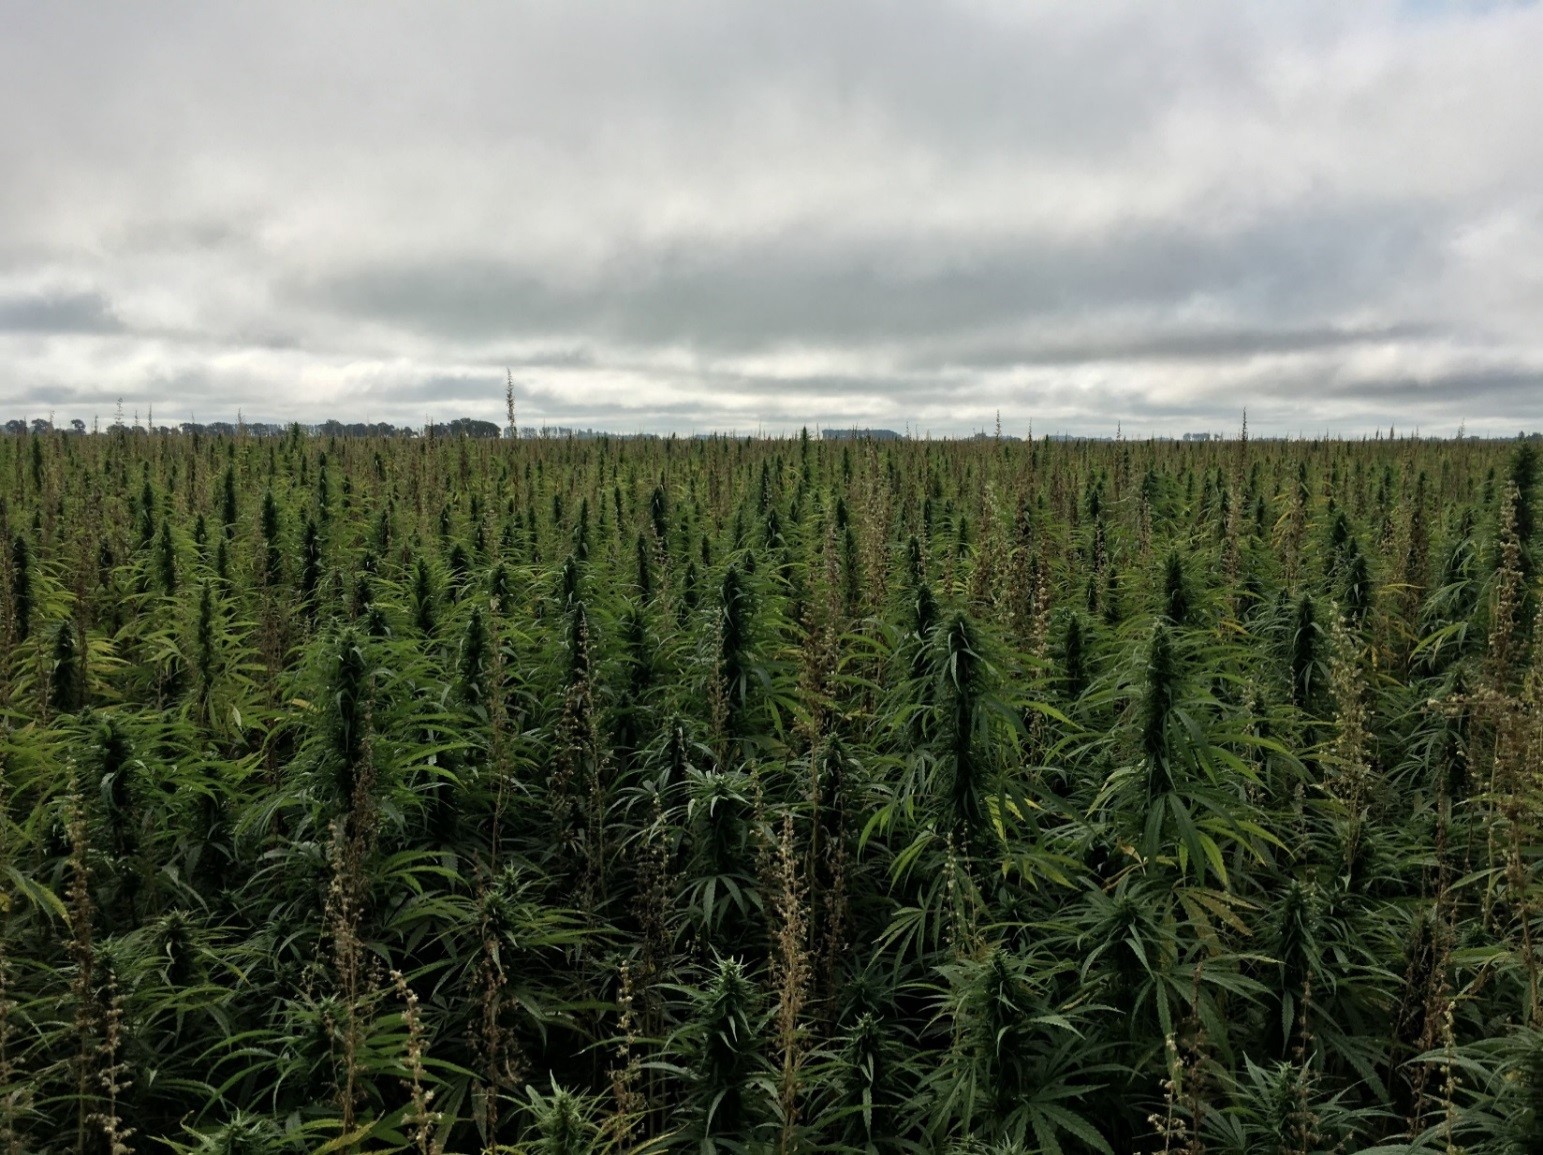 A field of industrial hemp growing in Polk County, Minnesota. The male flowers are dying back and the female plants are starting to set seed.